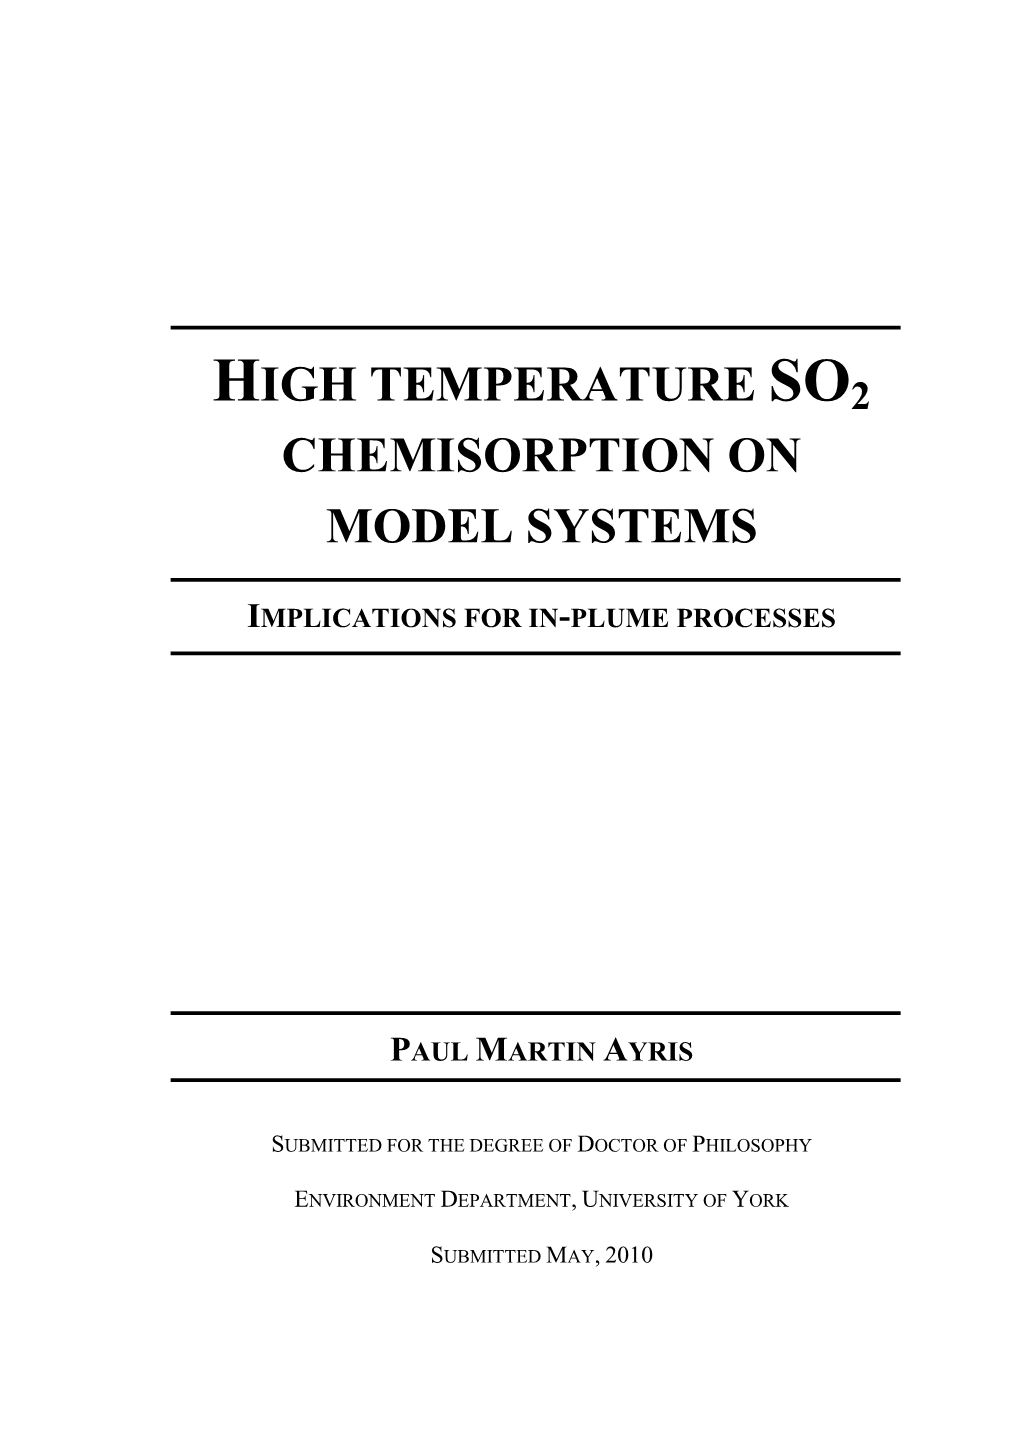 High Temperature So2 Chemisorption on Model Systems